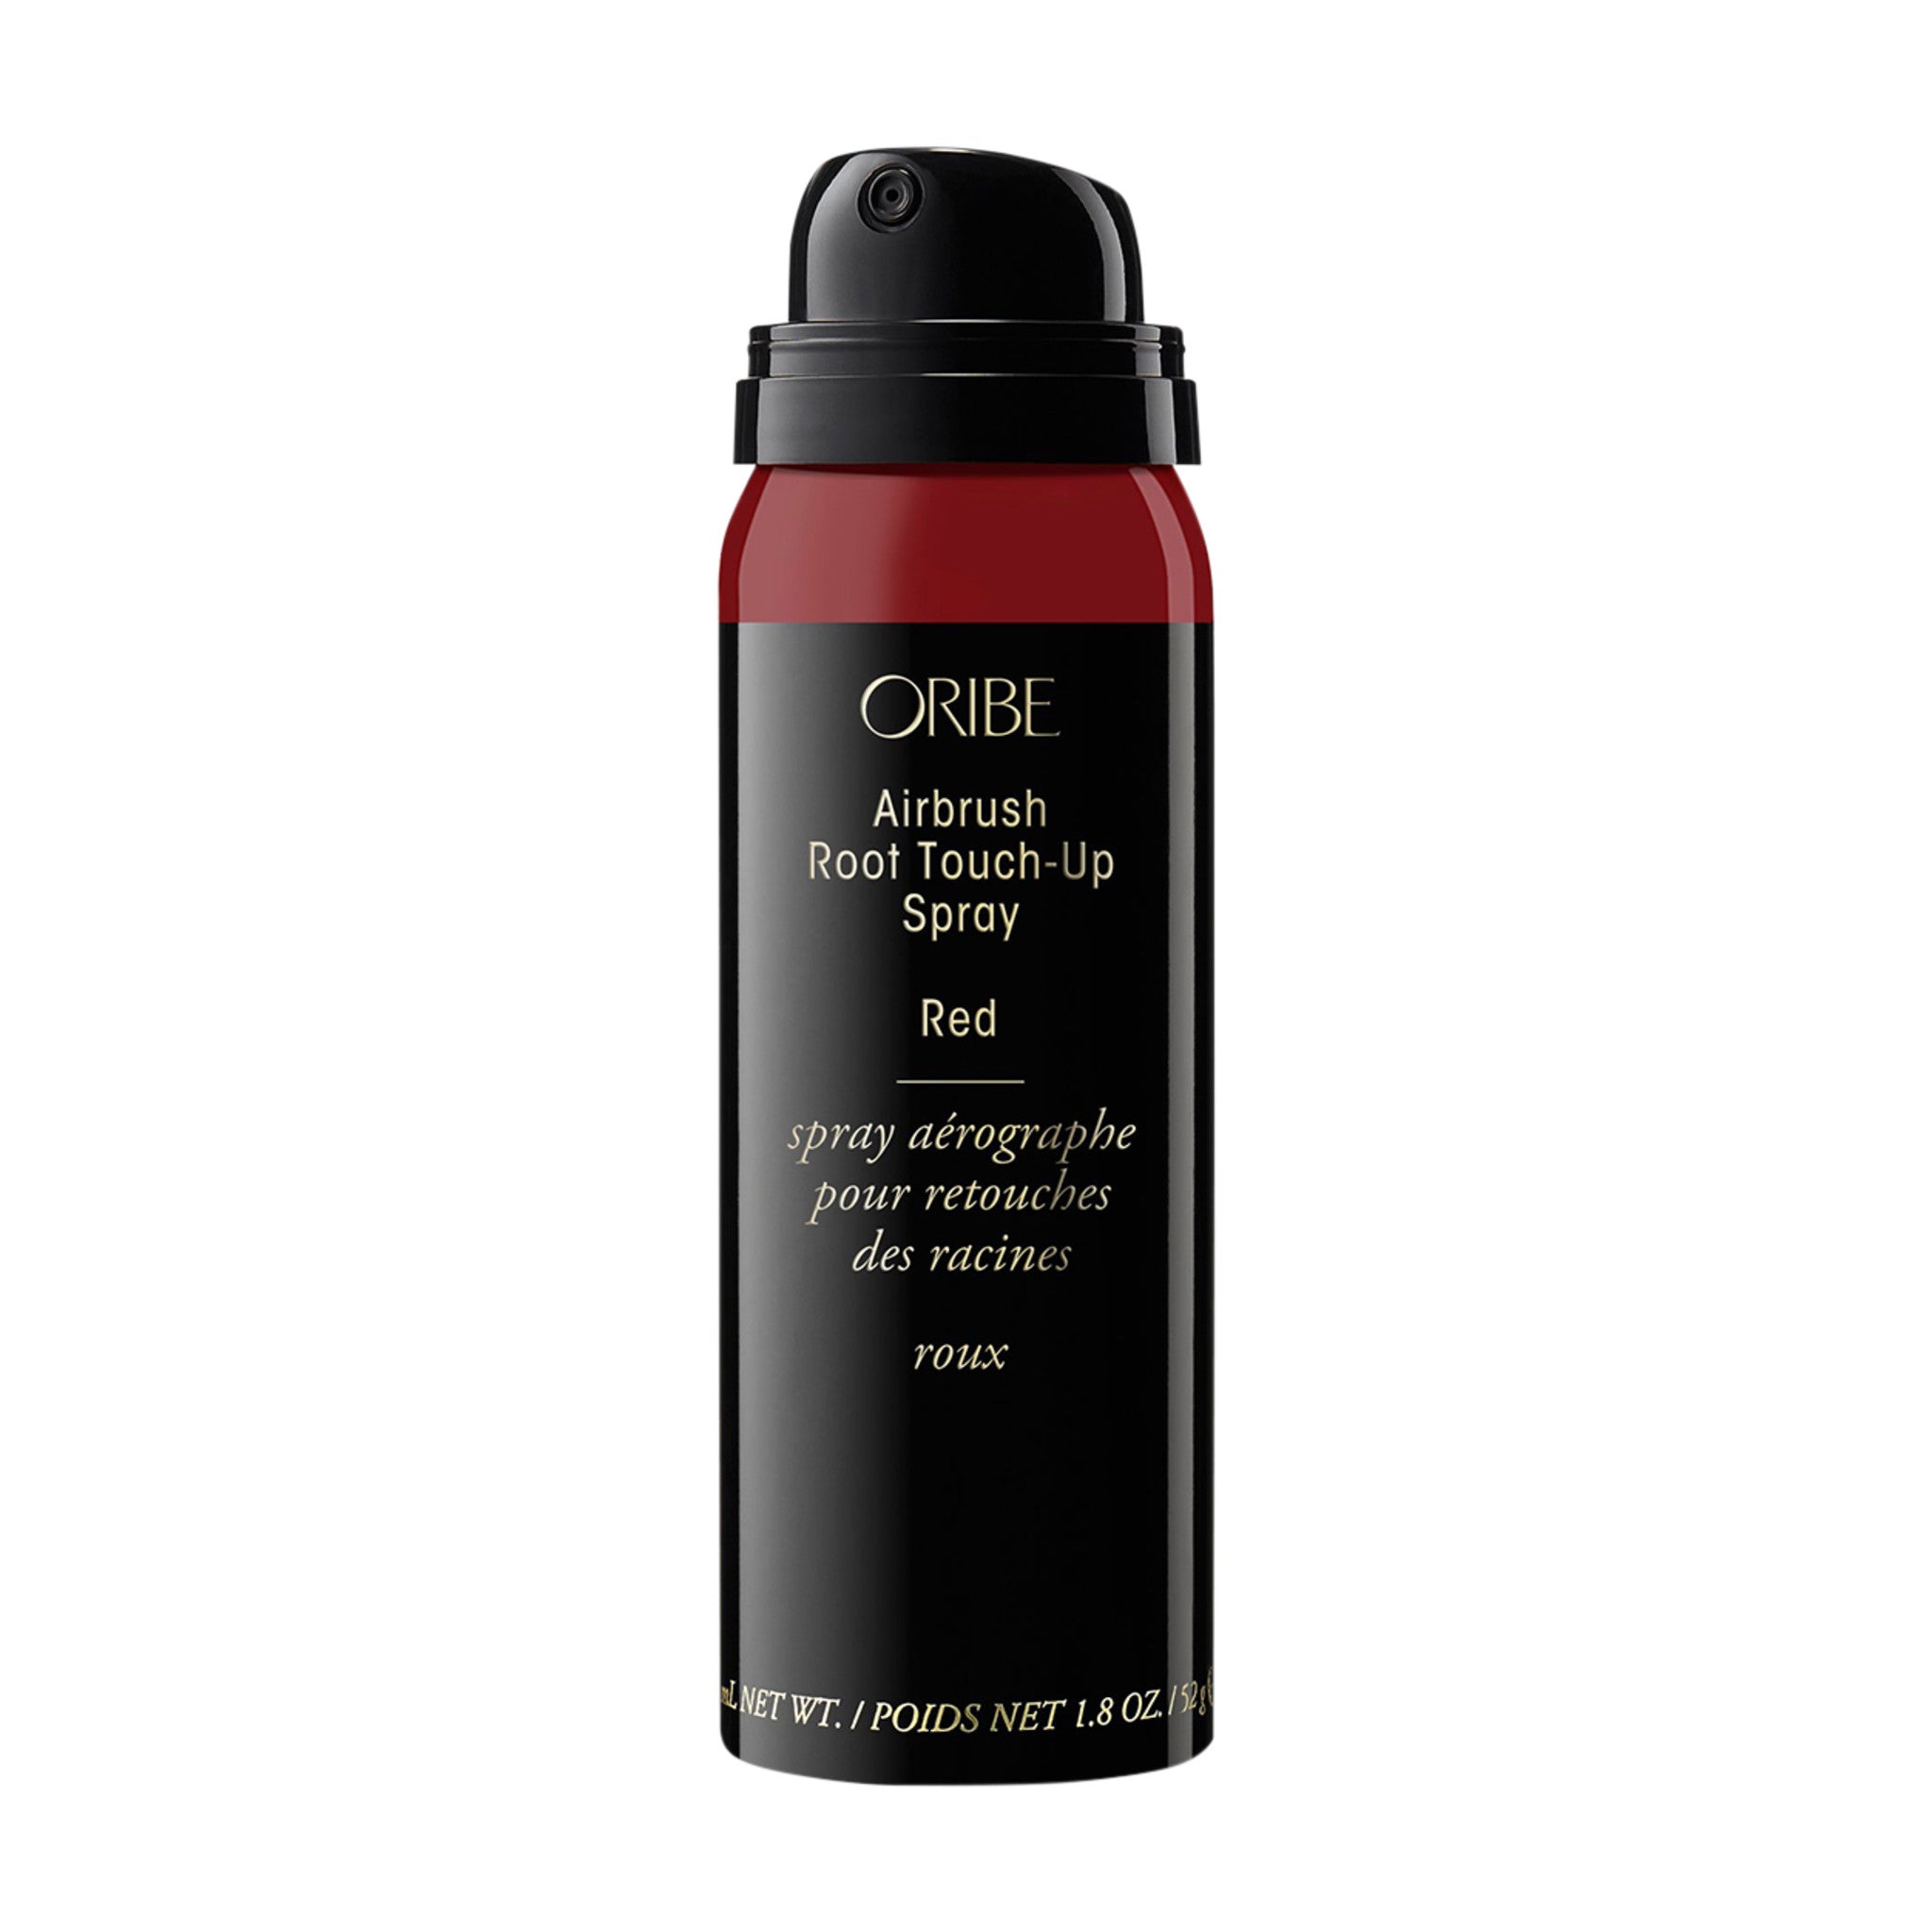 Oribe Airbrush Root Touch-Up Spray Color/Shade variant: Red main image. This product is for red hair